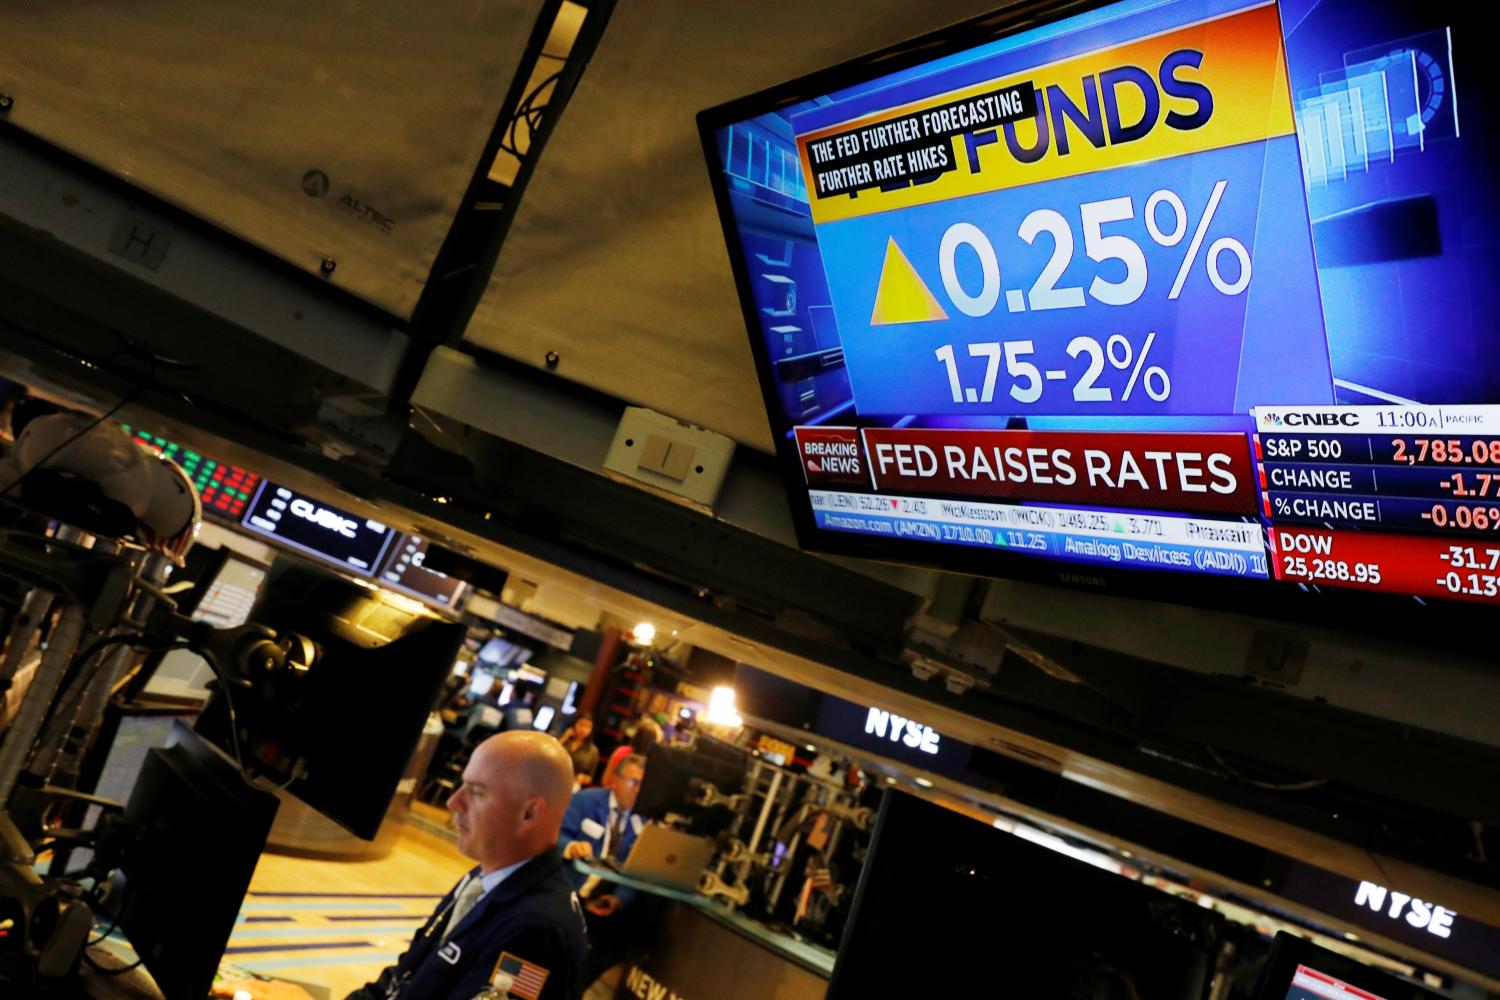 Traders work on the floor of the New York Stock Exchange (NYSE) as a TV screen shows the Fed Rate hike in New York City, U.S. June 13, 2018.  REUTERS/Brendan McDermid - RC19075F08F0